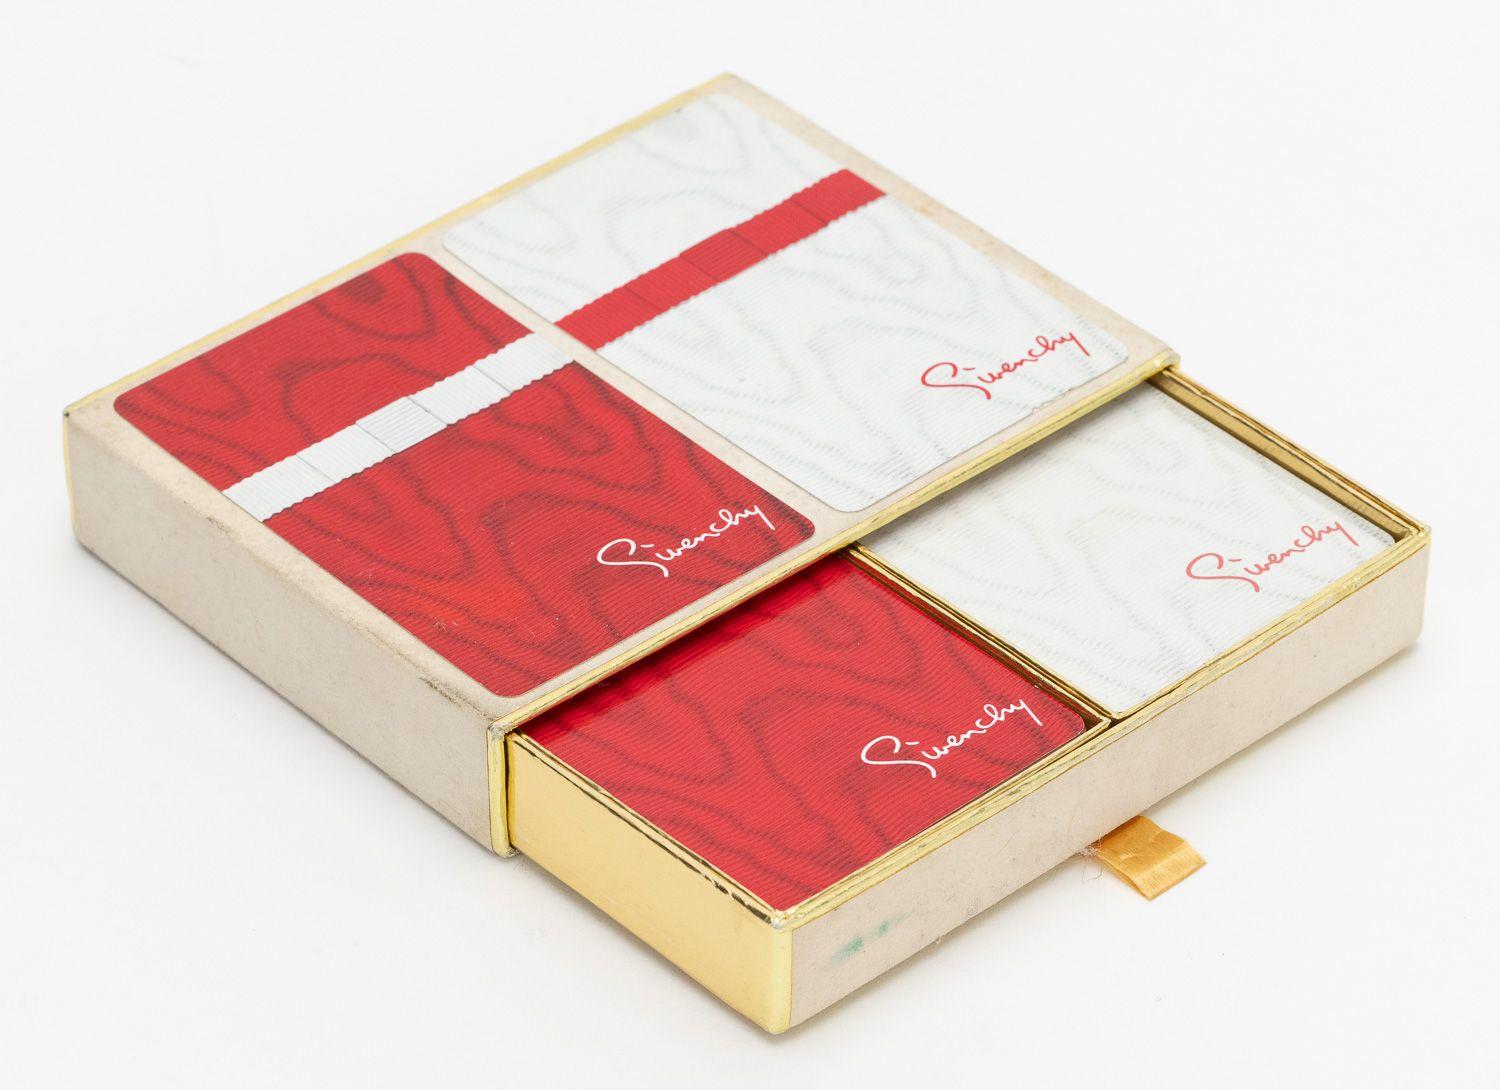 Givenchy 2 decks of Red and White Vintage Playing Cards.
Come with original box.